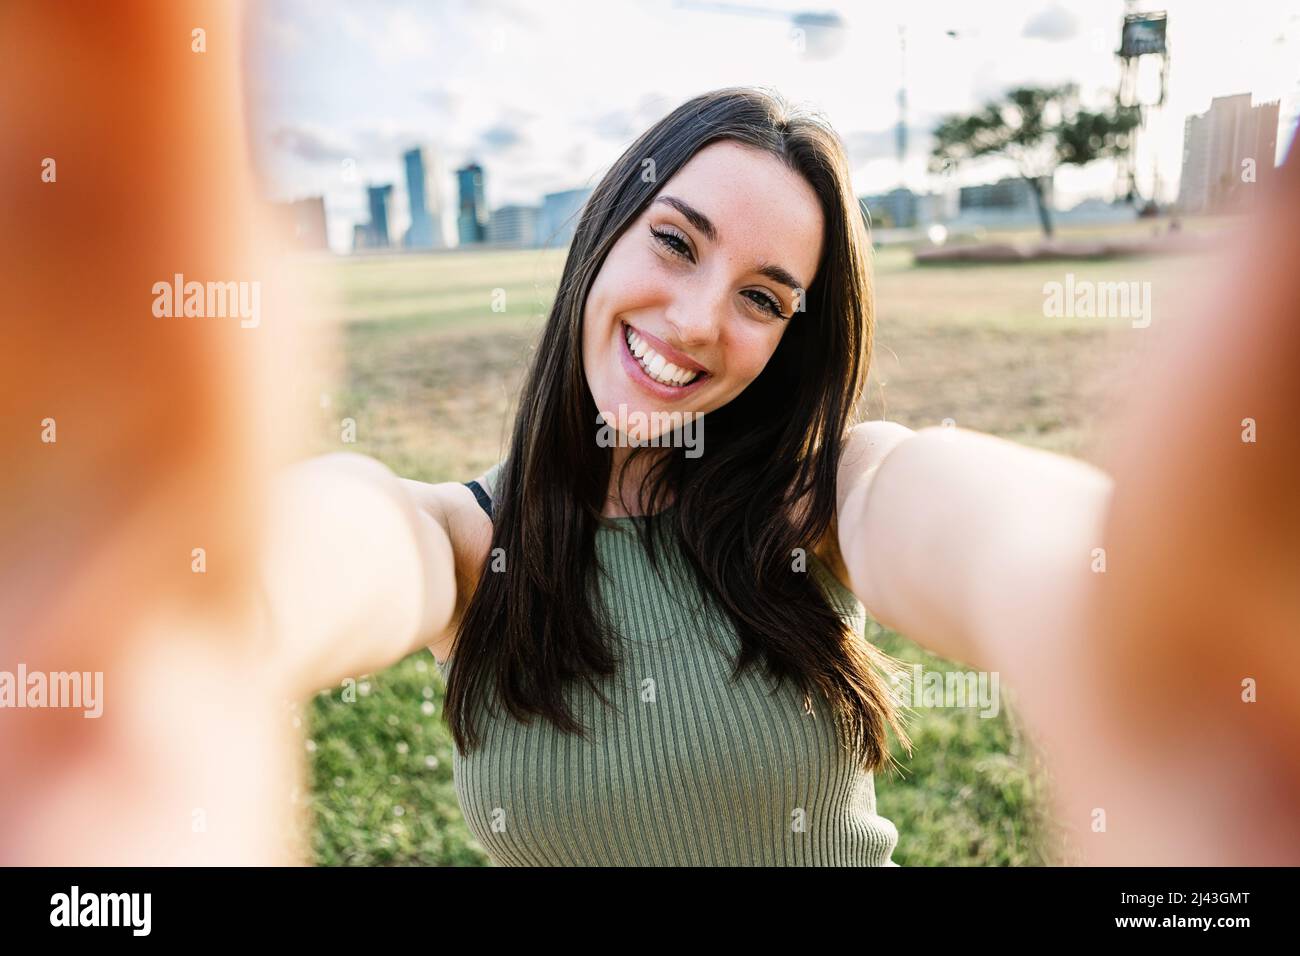 Beautiful young woman taking selfie portrait with cellphone outdoors in summer Stock Photo